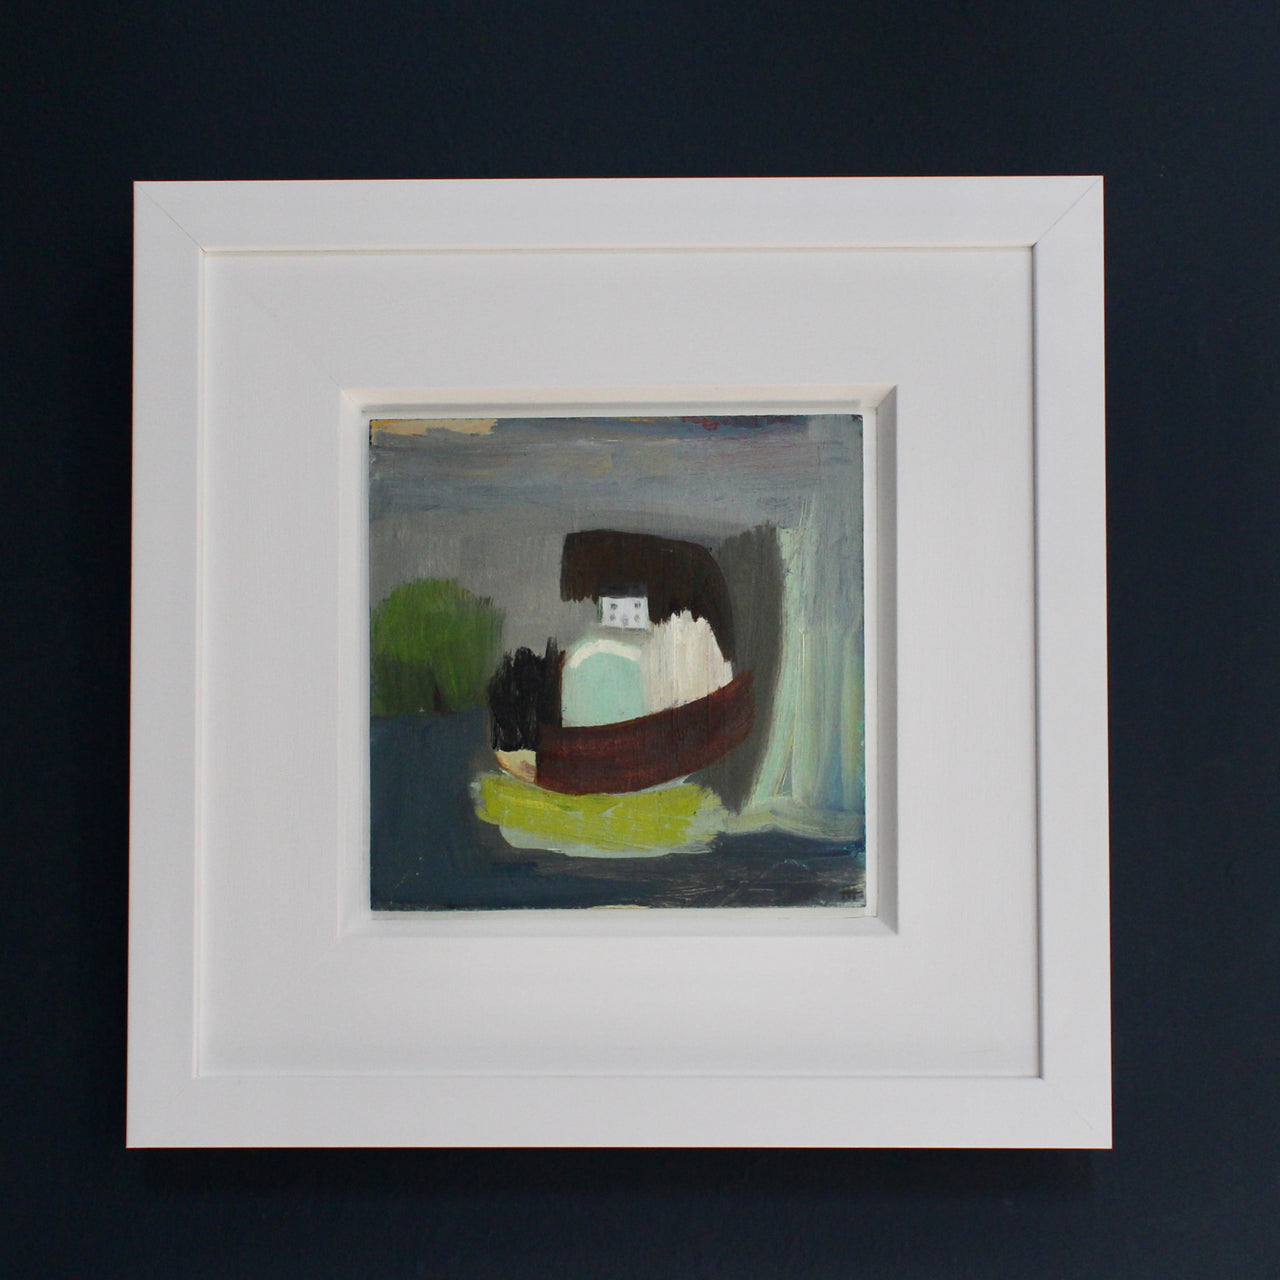 Framed abstract landscape painting by Cornish artist with white house, green tree and blue 